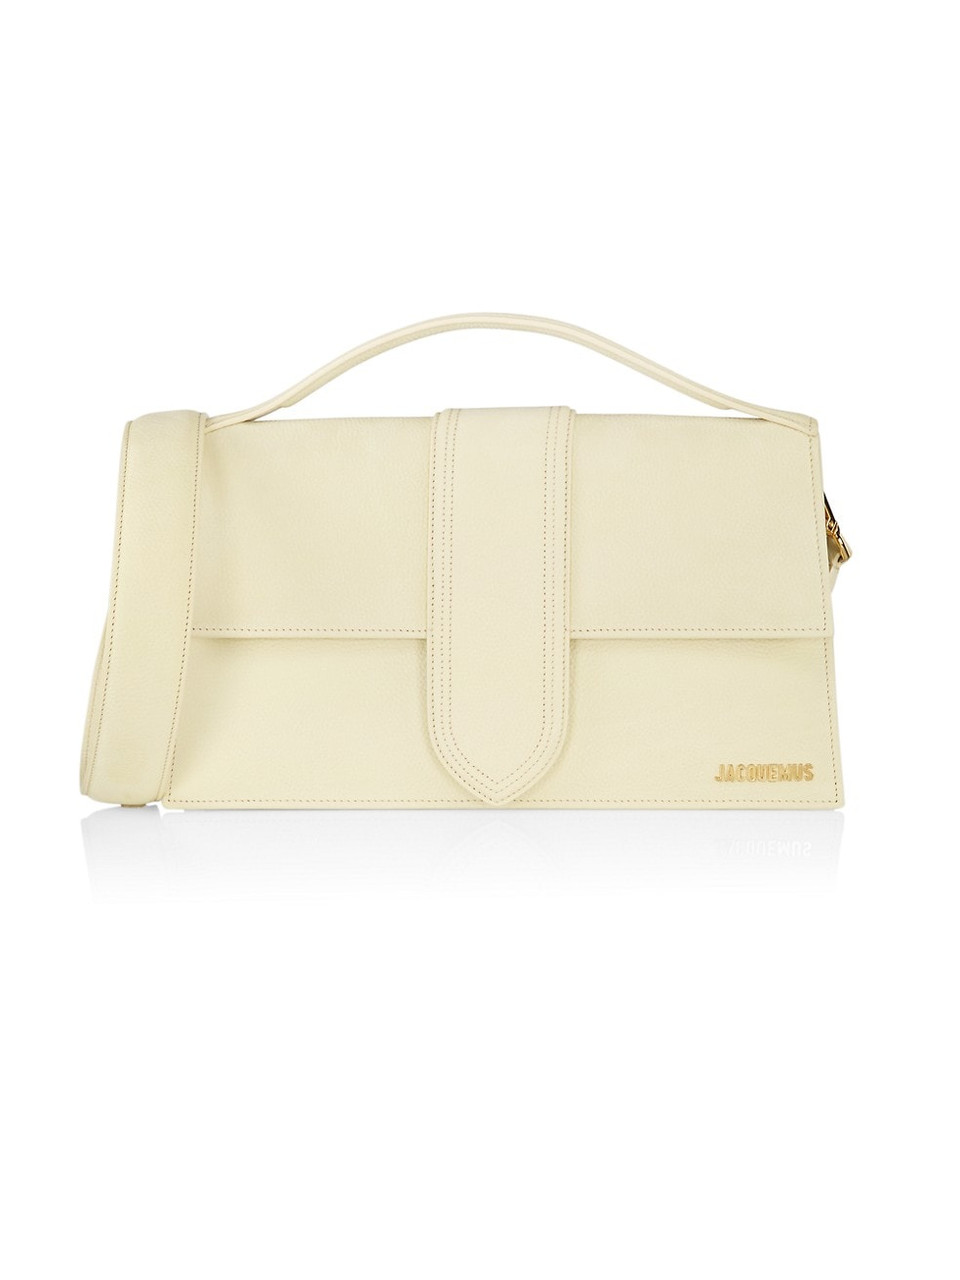 Jacquemus Le Petit Chiquito Patent-leather And Suede Bag in Yellow